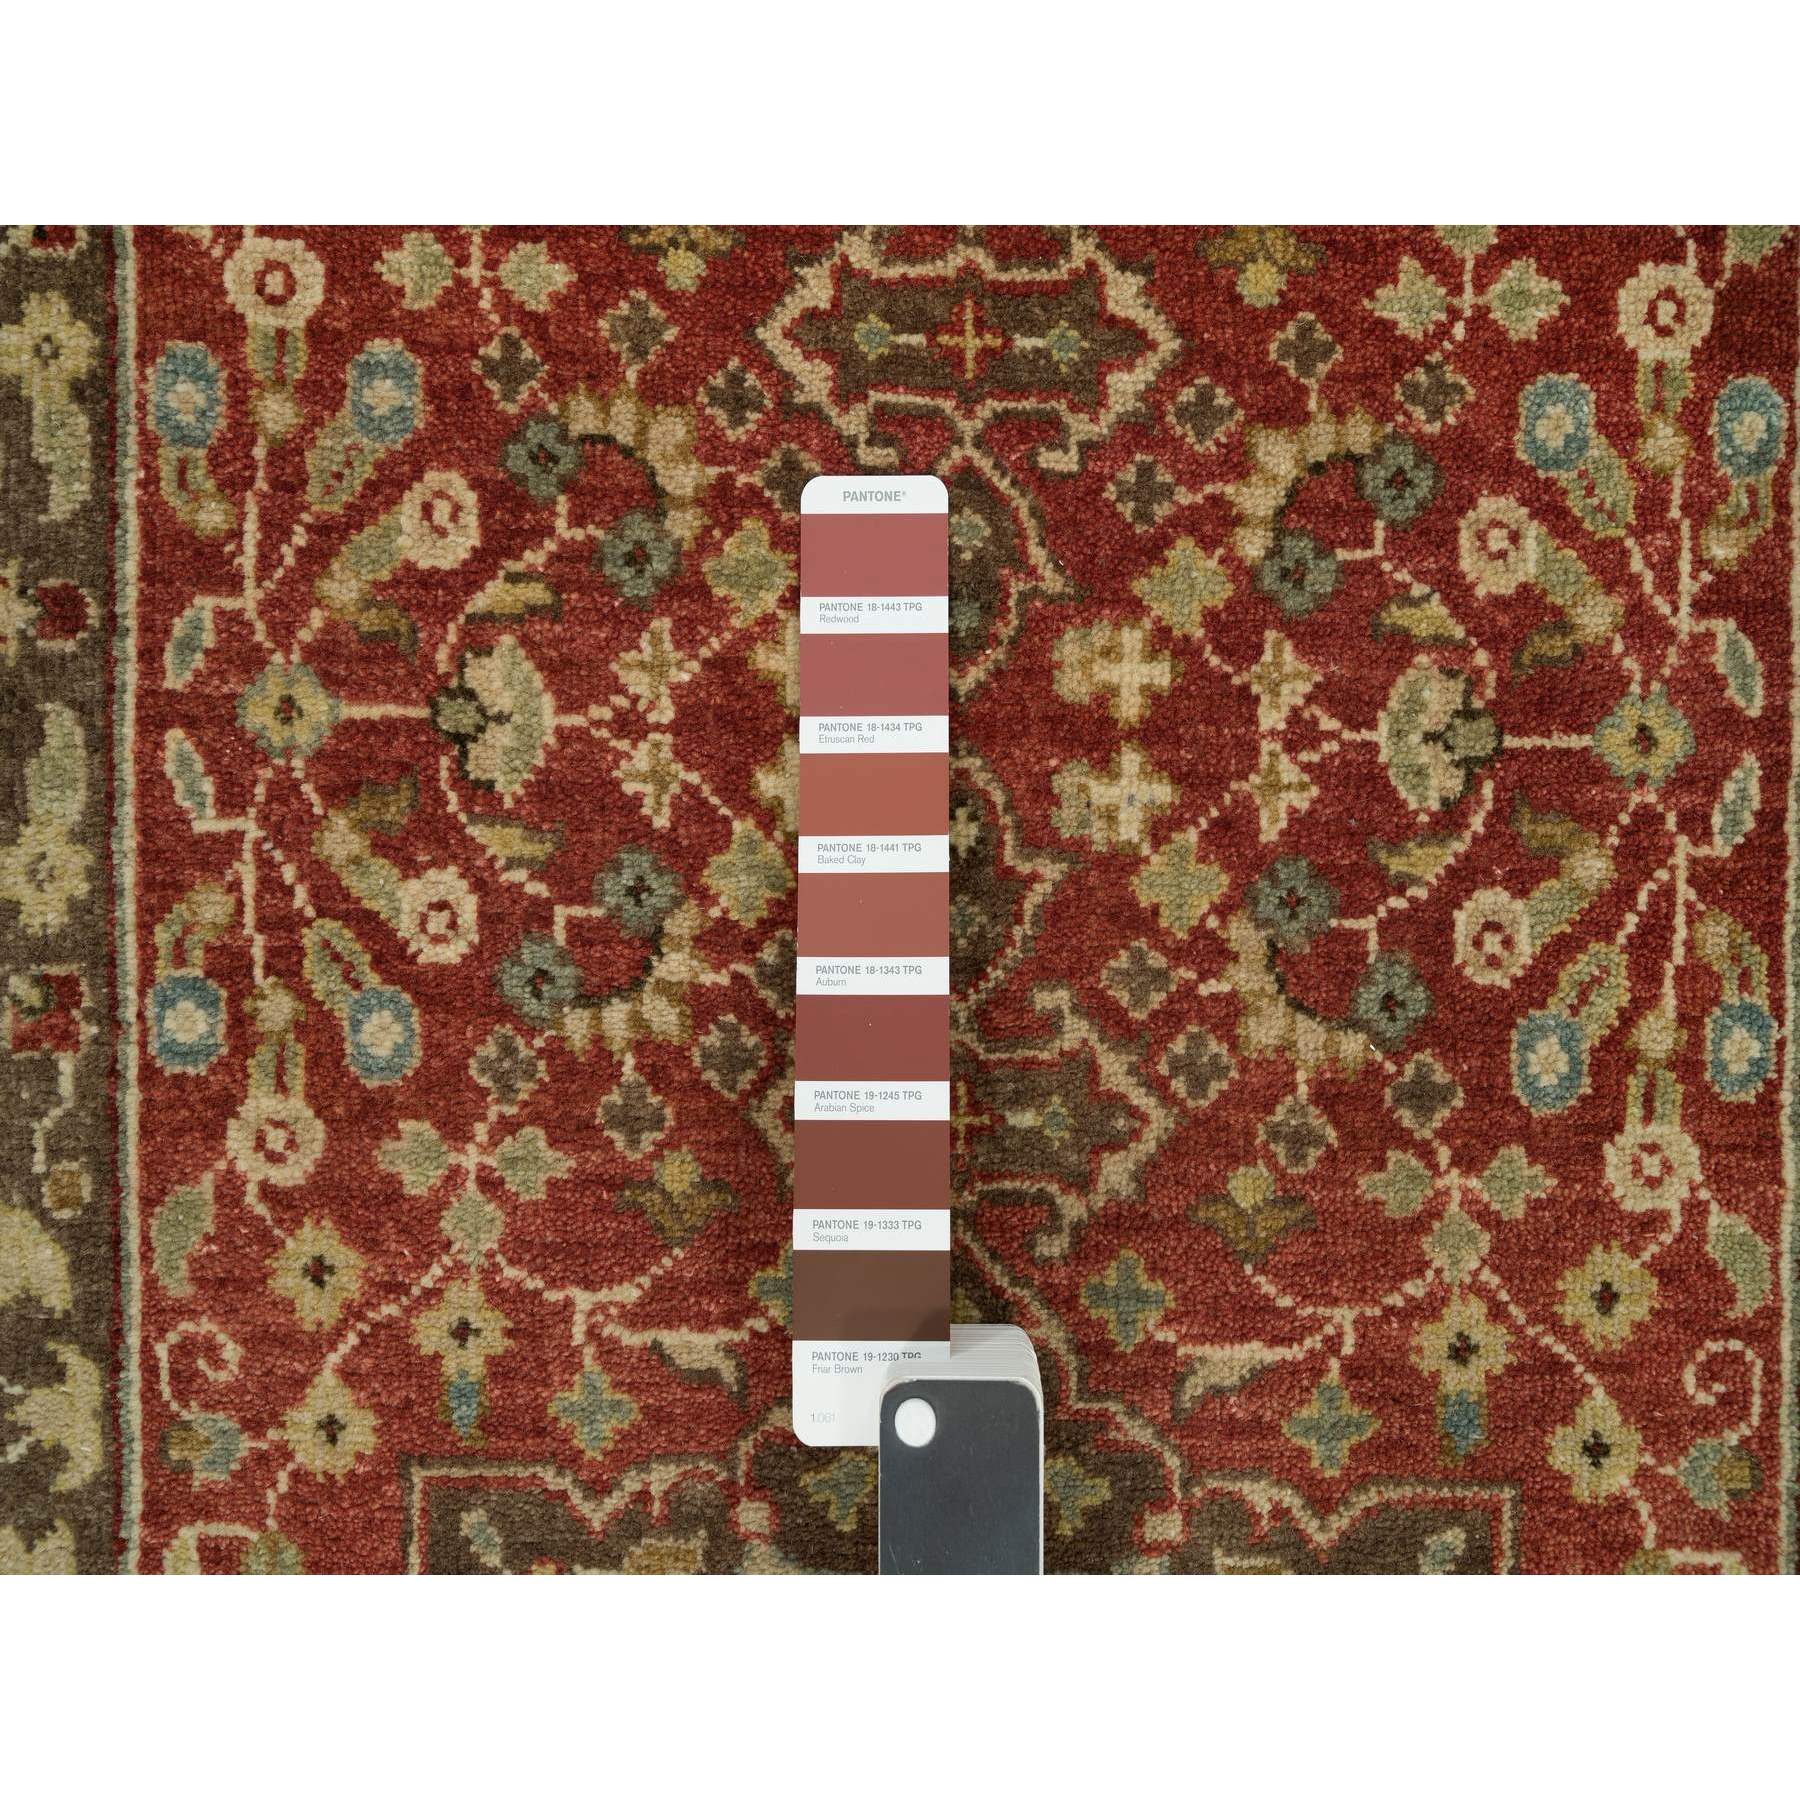 Fine-Oriental-Hand-Knotted-Rug-451410